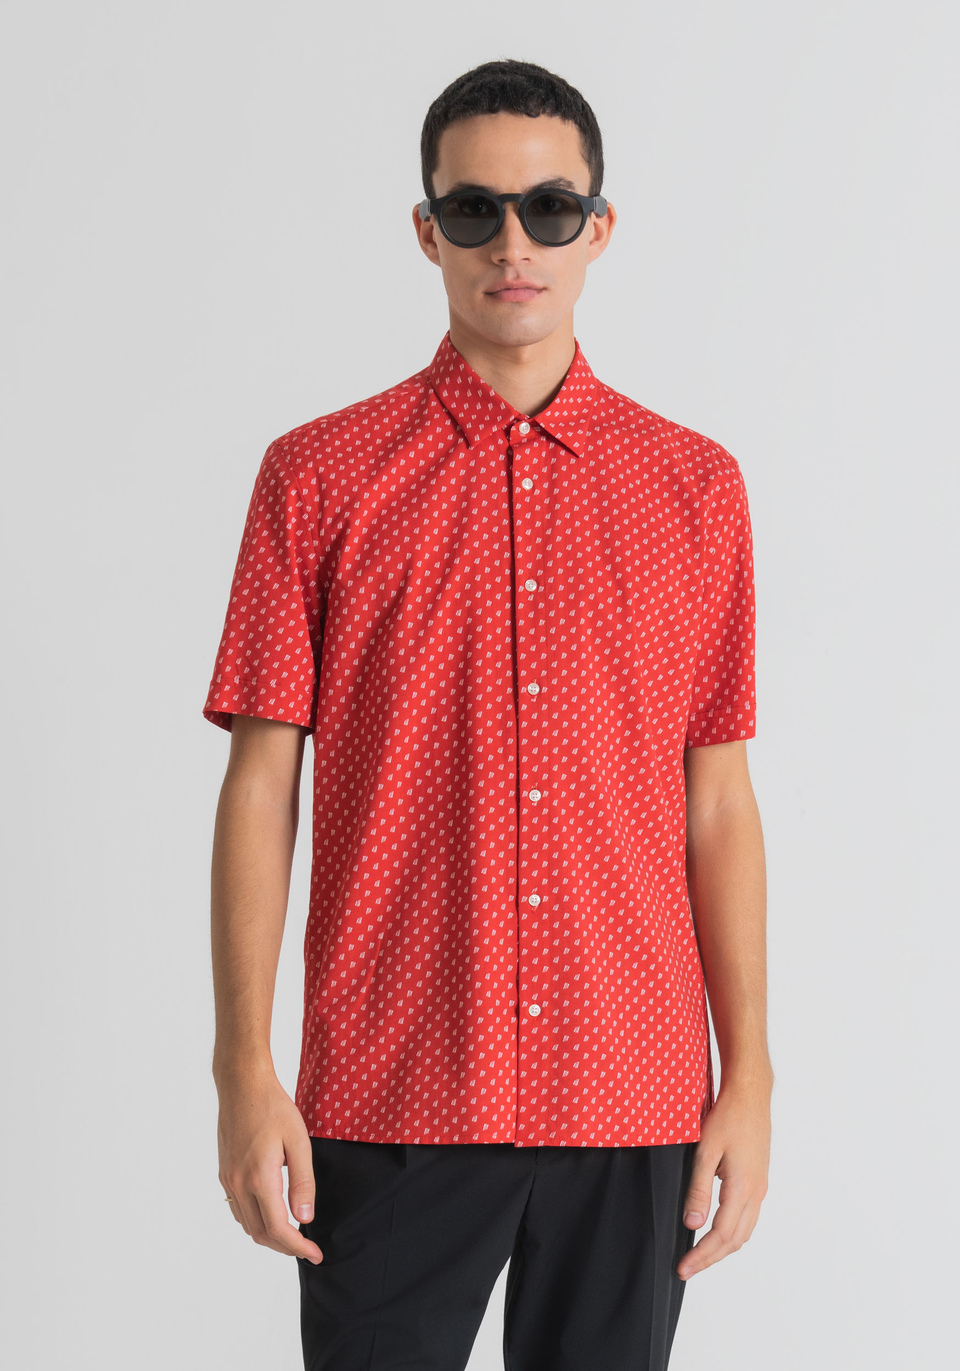 REGULAR STRAIGHT-FIT SHORT-SLEEVED SHIRT IN COTTON AND VISCOSE BLEND WITH MICRO PATTERN - Antony Morato Online Shop